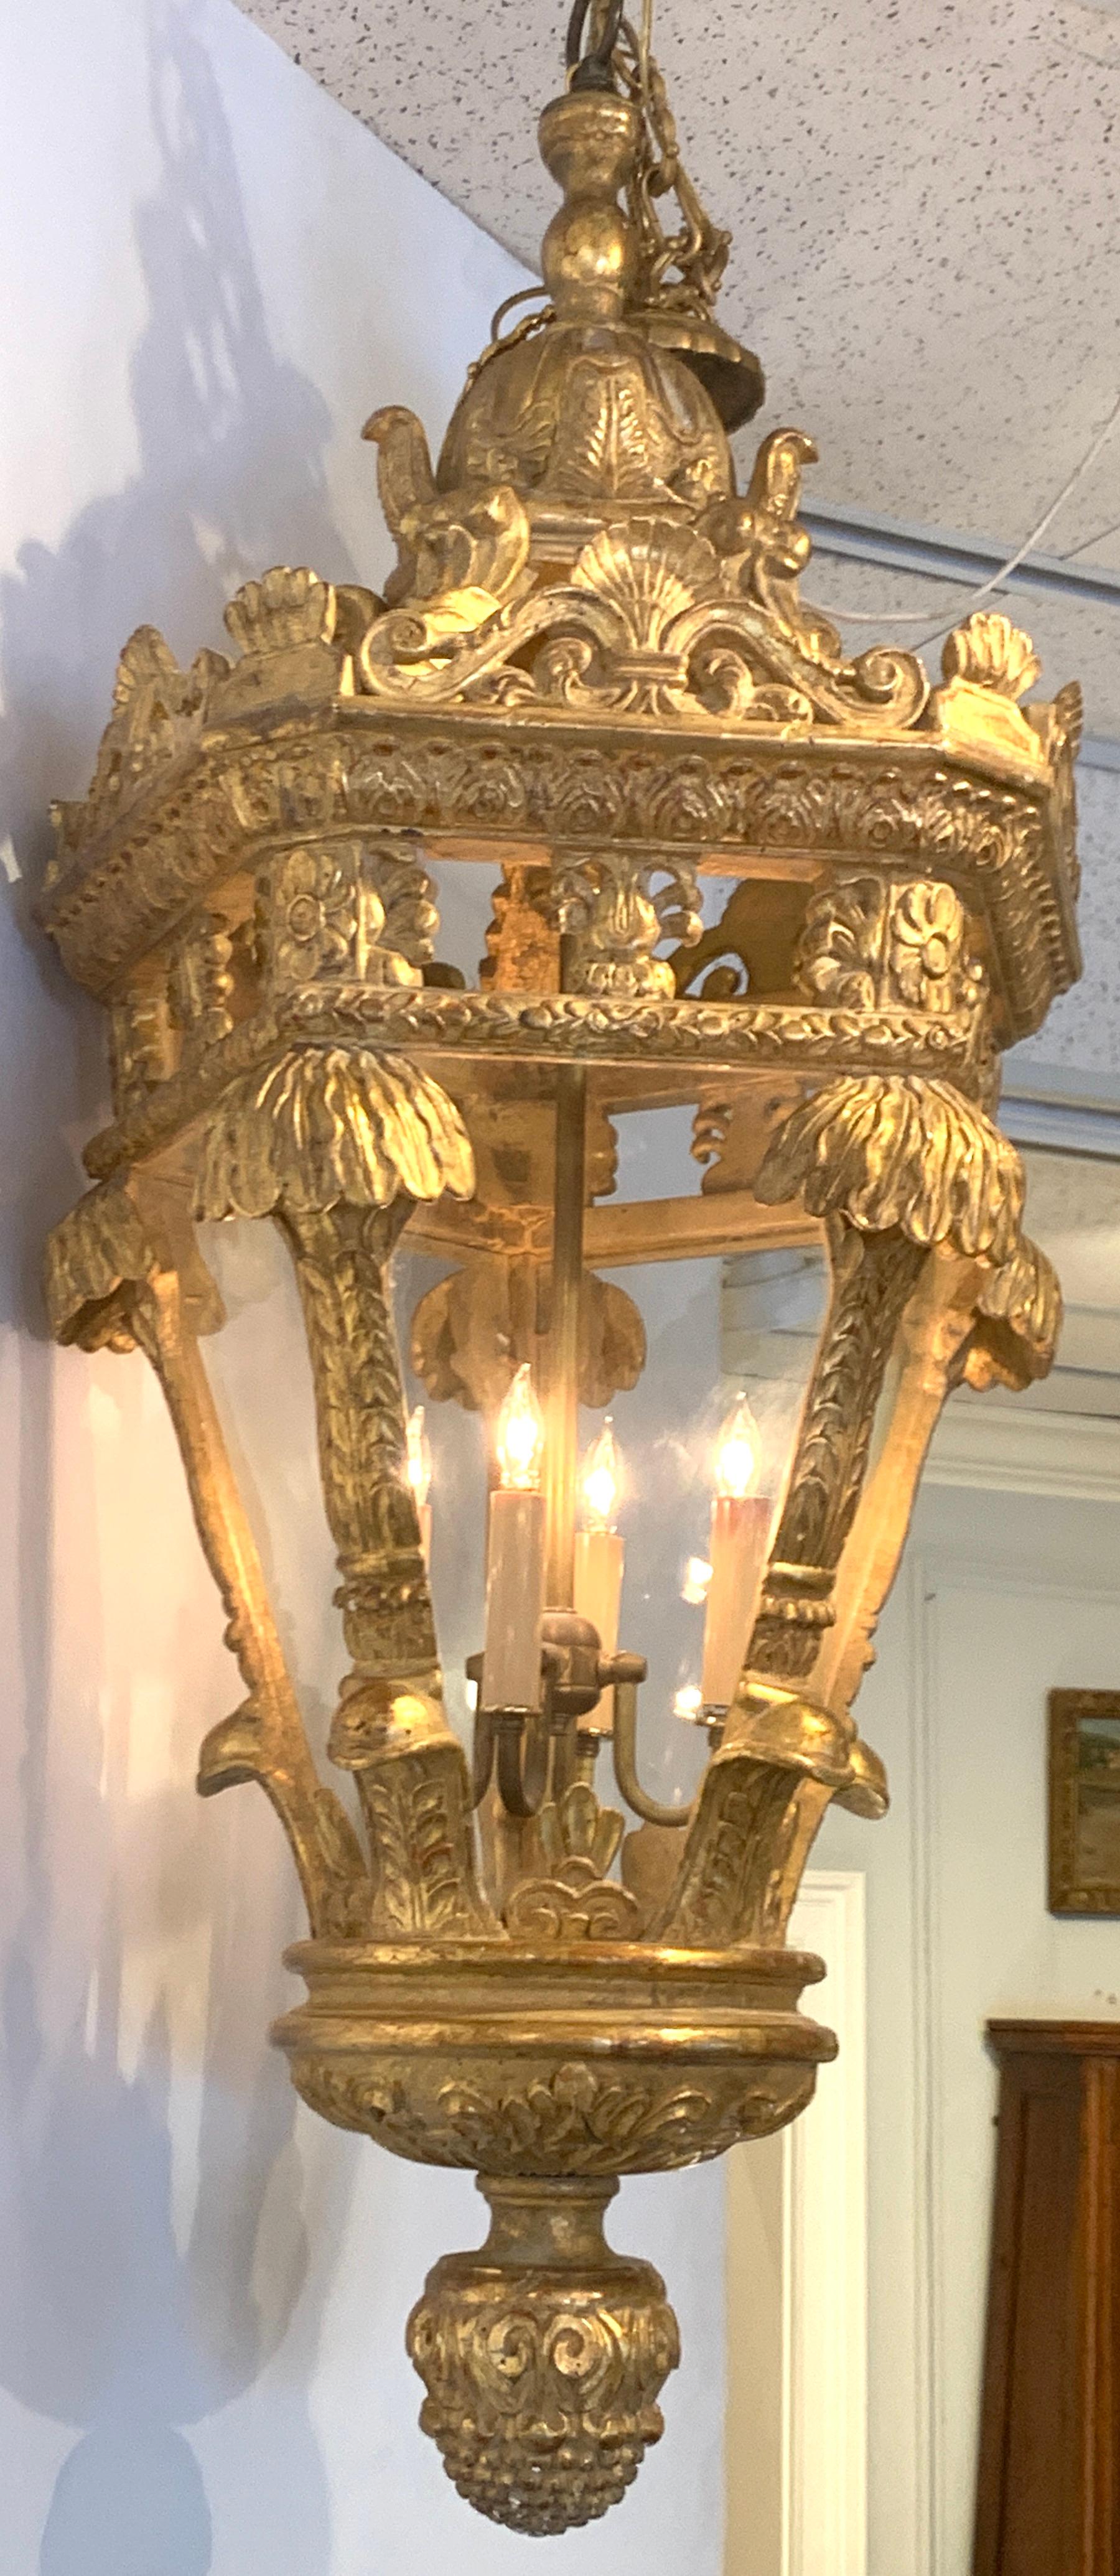 Gorgeous French carved giltwood lantern, of large size, with dome top and palmette and floral carvings. The interior with four candelabra bulbs, ending with an acanthus finial. From the Breakers Palm Beach FL.

     